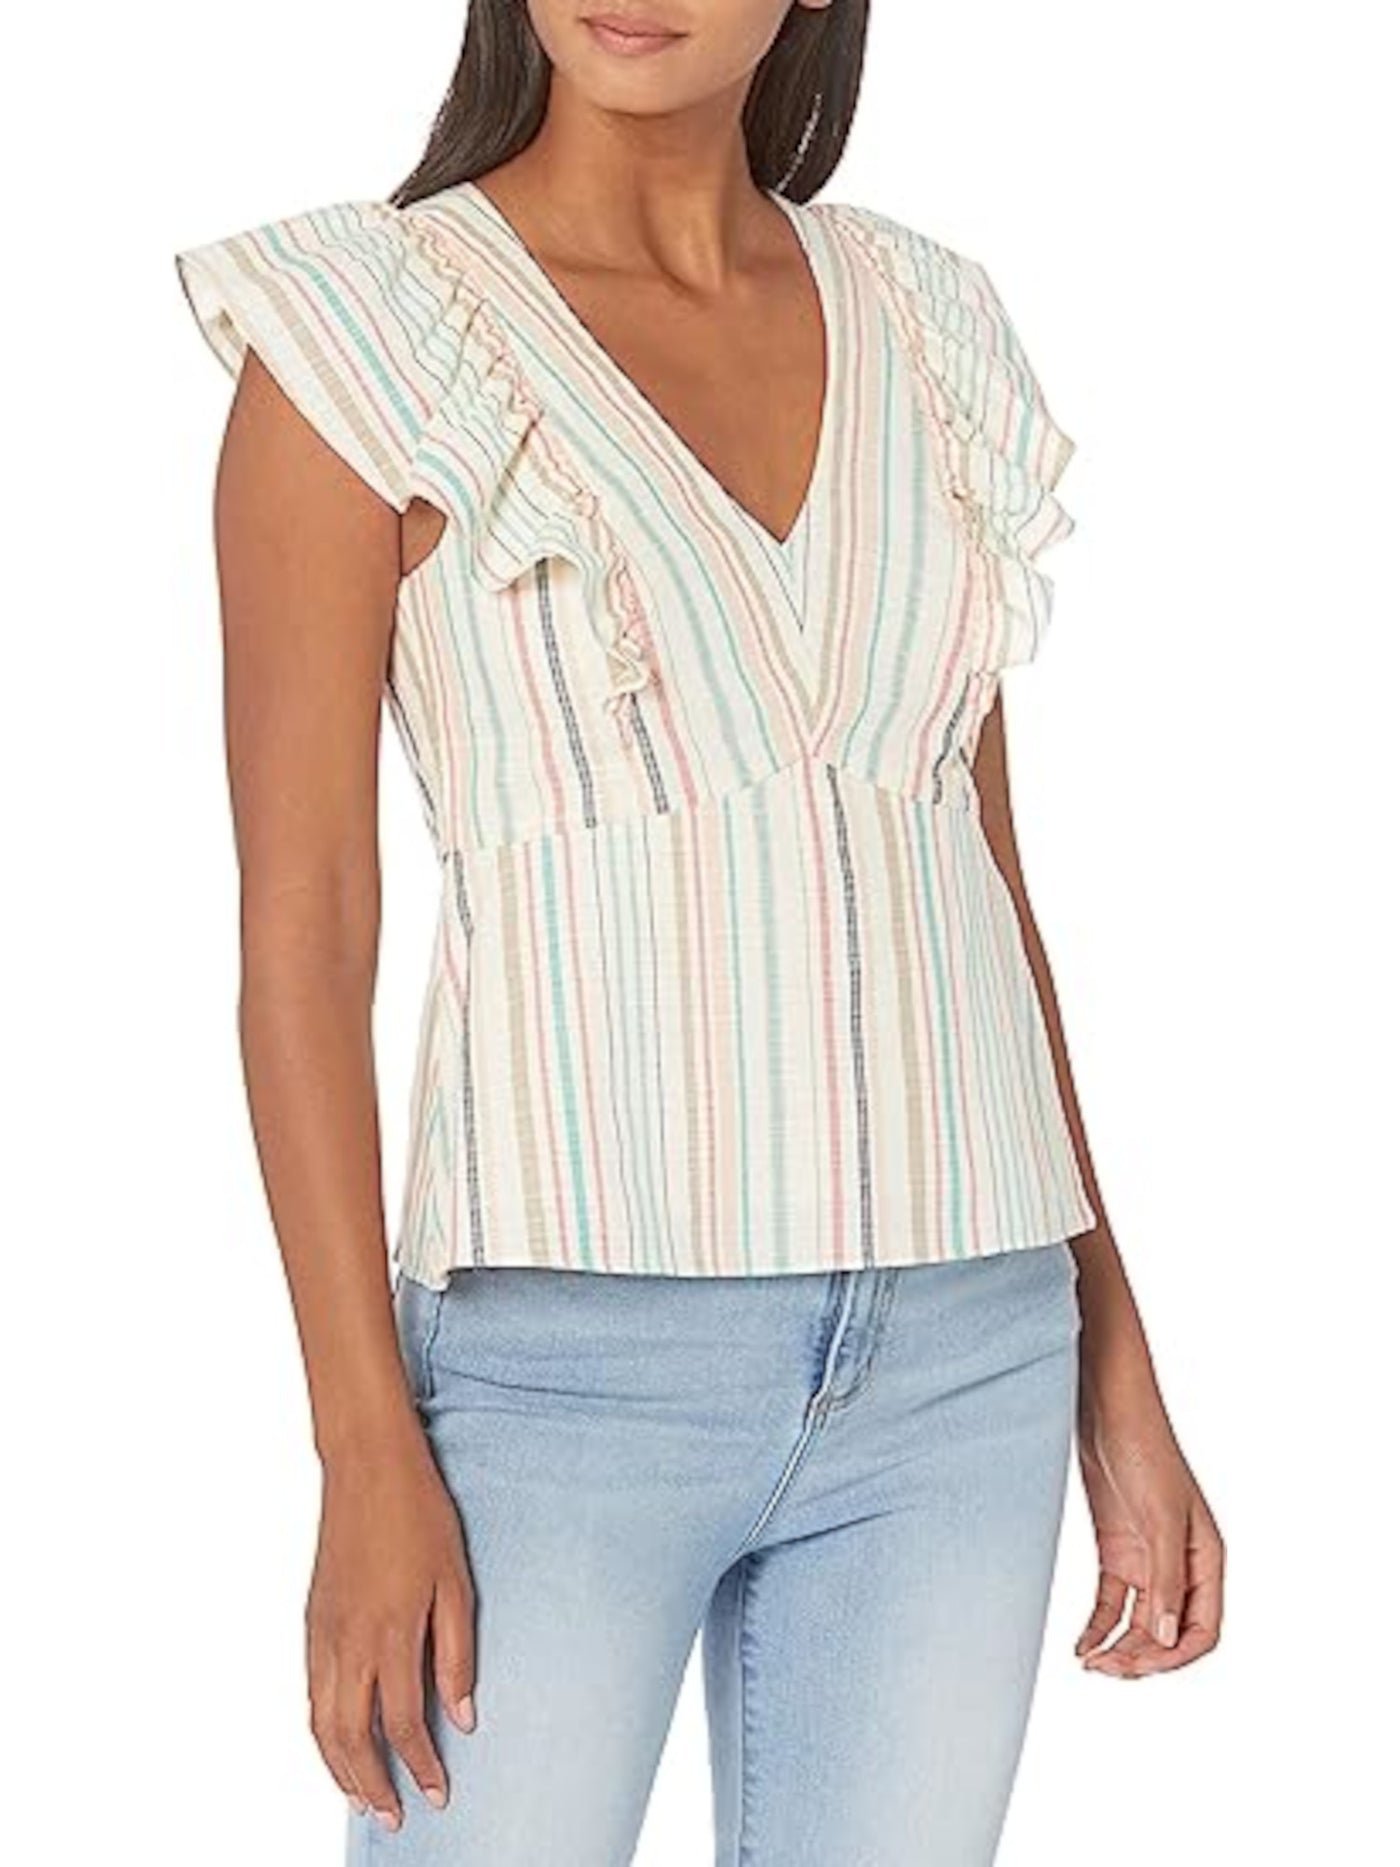 PARKER Womens Beige Ruffled Lined Zippered Pullover Striped Cap Sleeve V Neck Top S